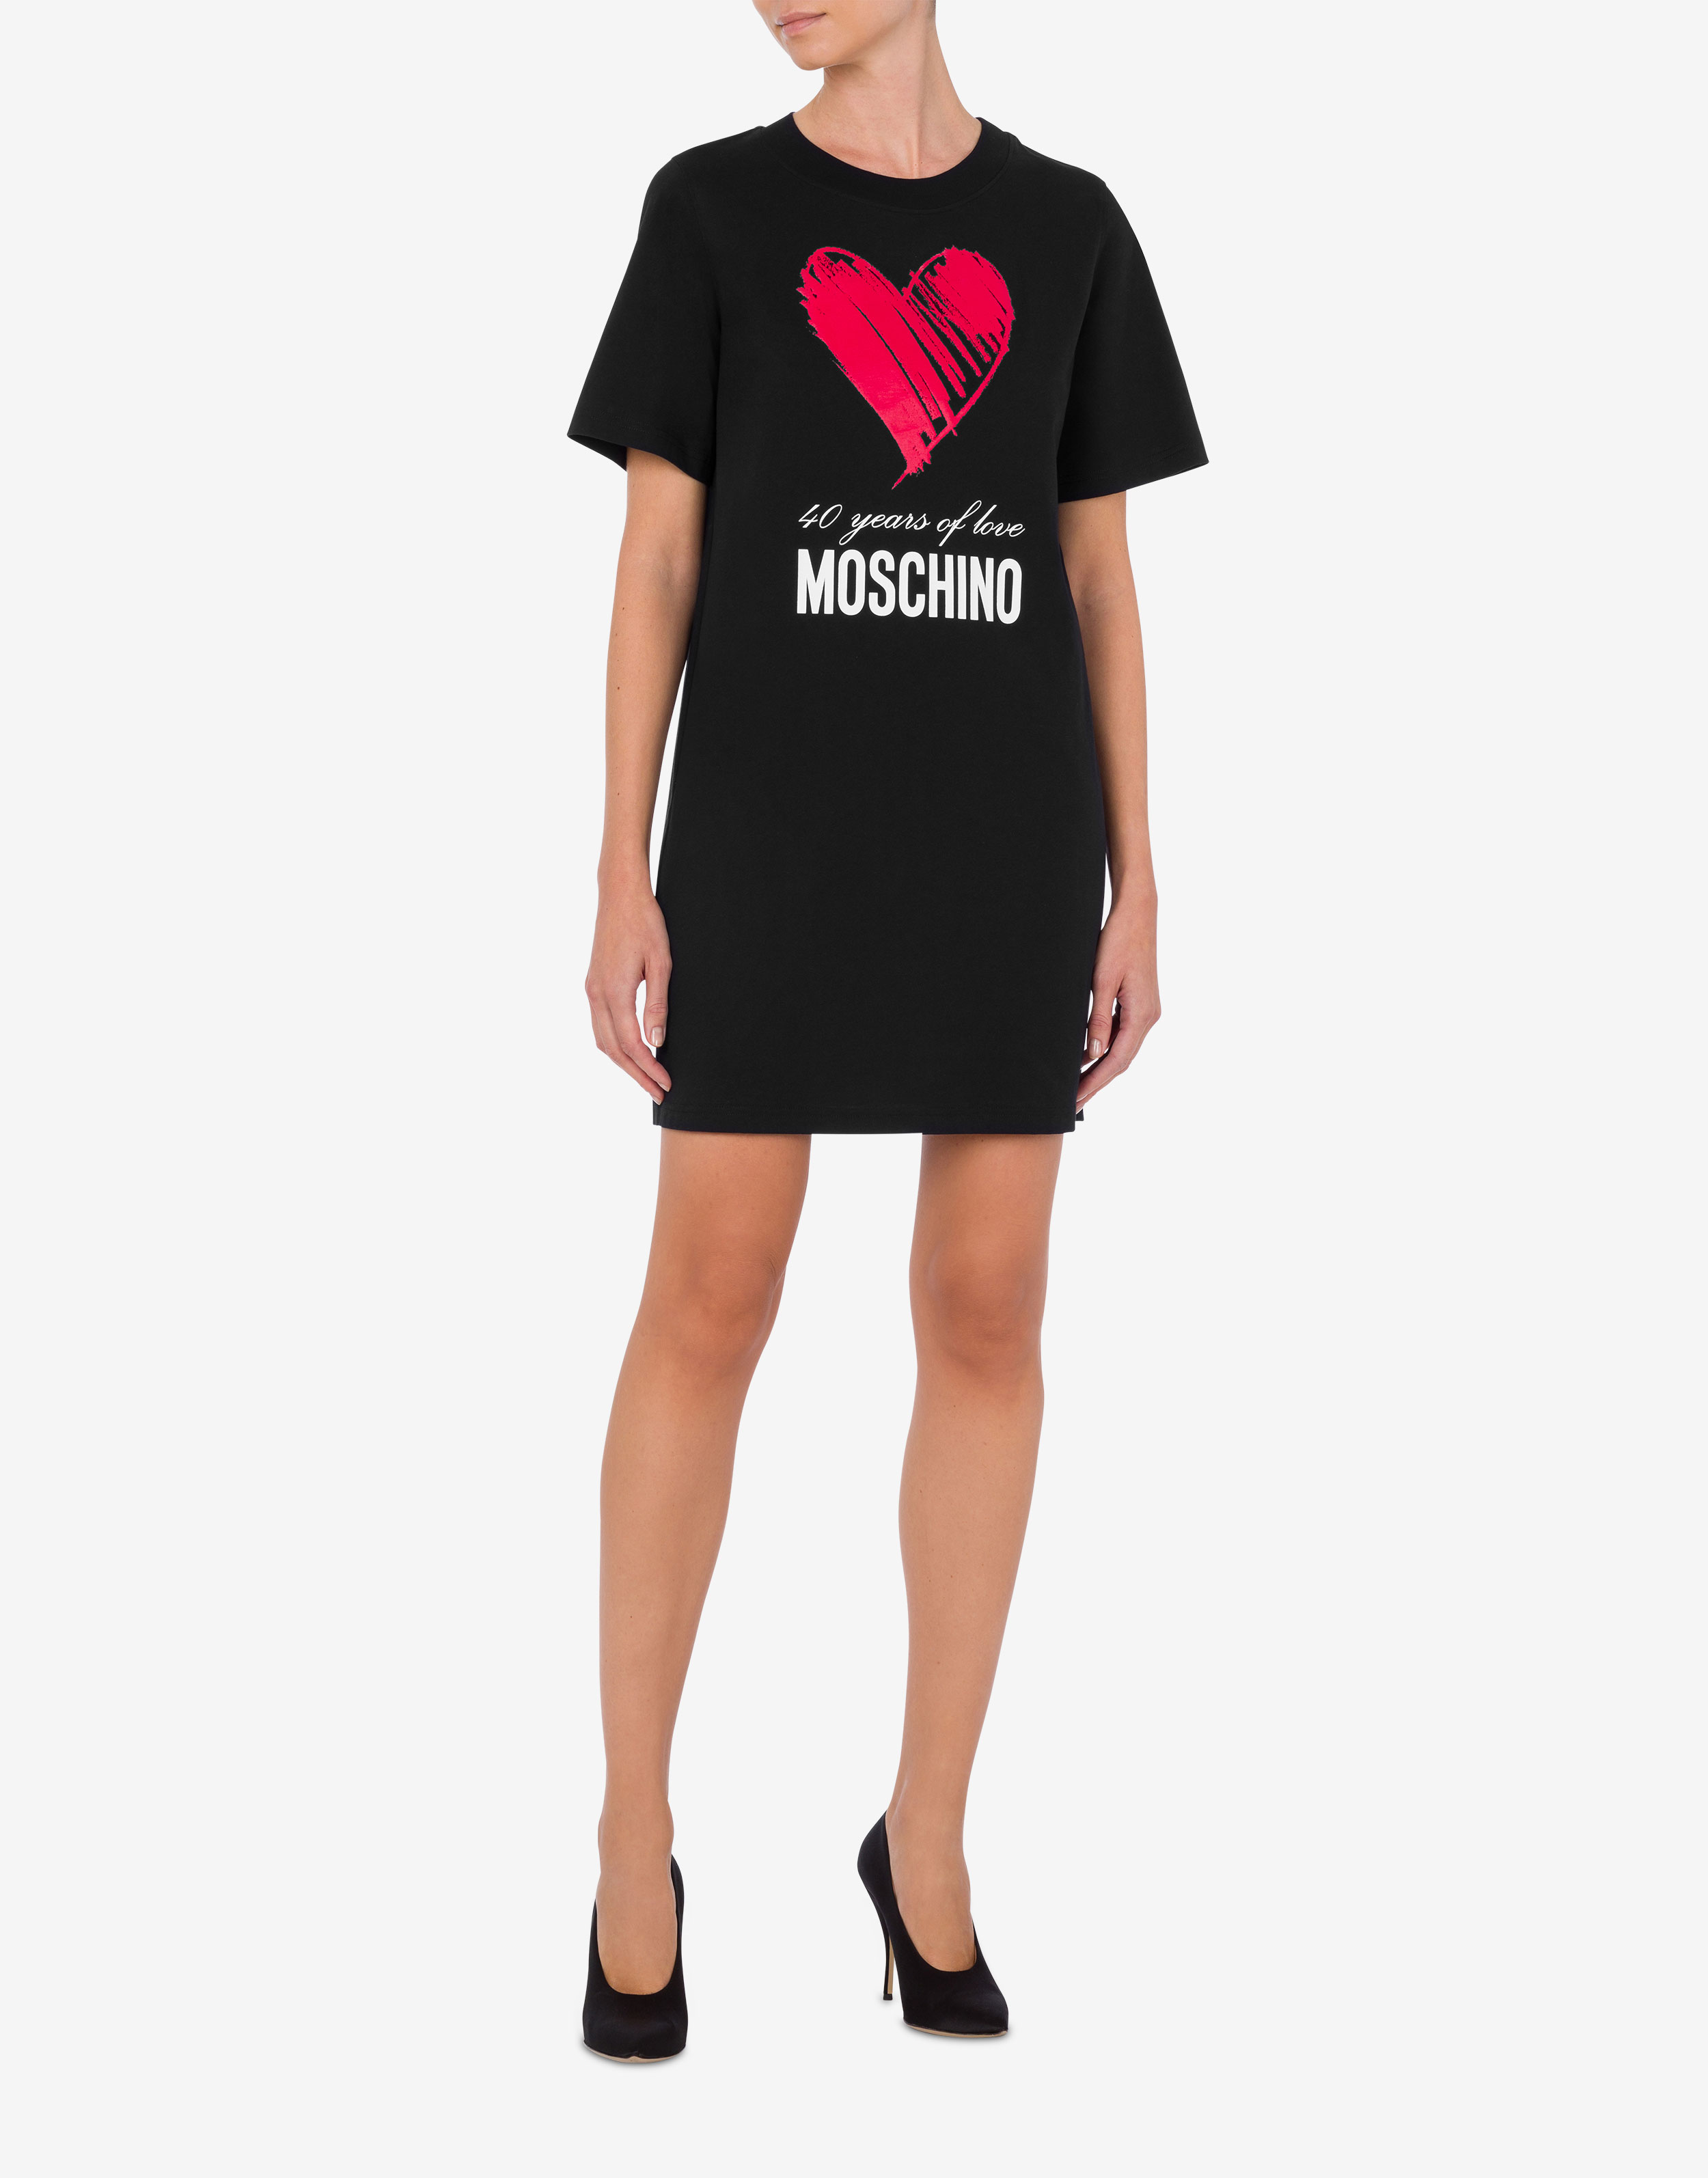 Moschino Nothing To Wear Sequin Shirt Dress in White